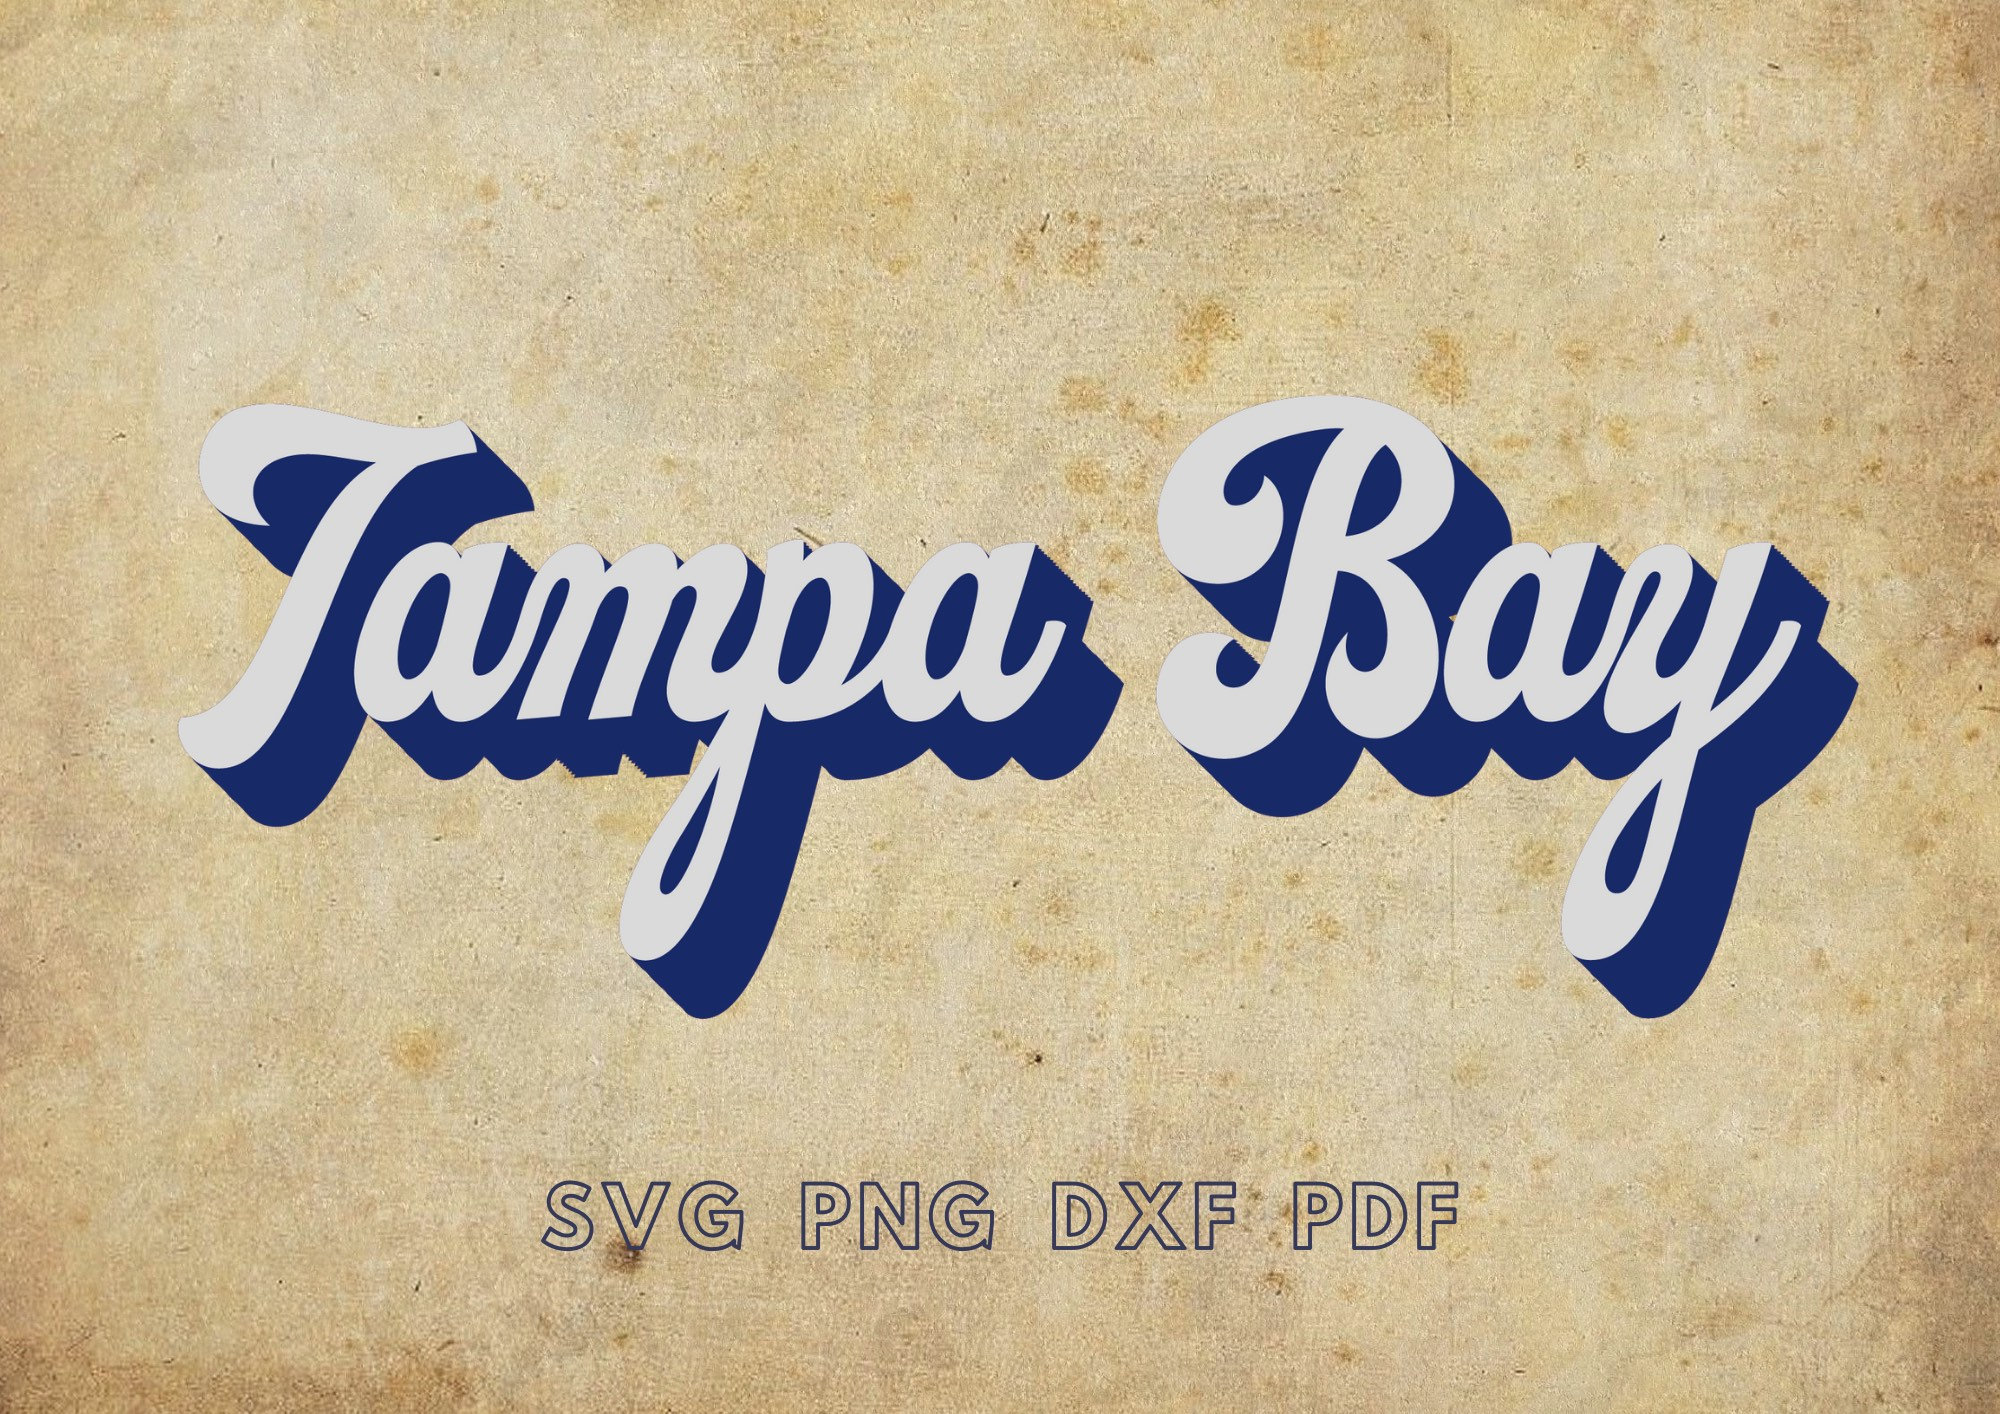 Tampa Bay Rays Logo PNG Transparent & SVG Vector - Freebie Supply